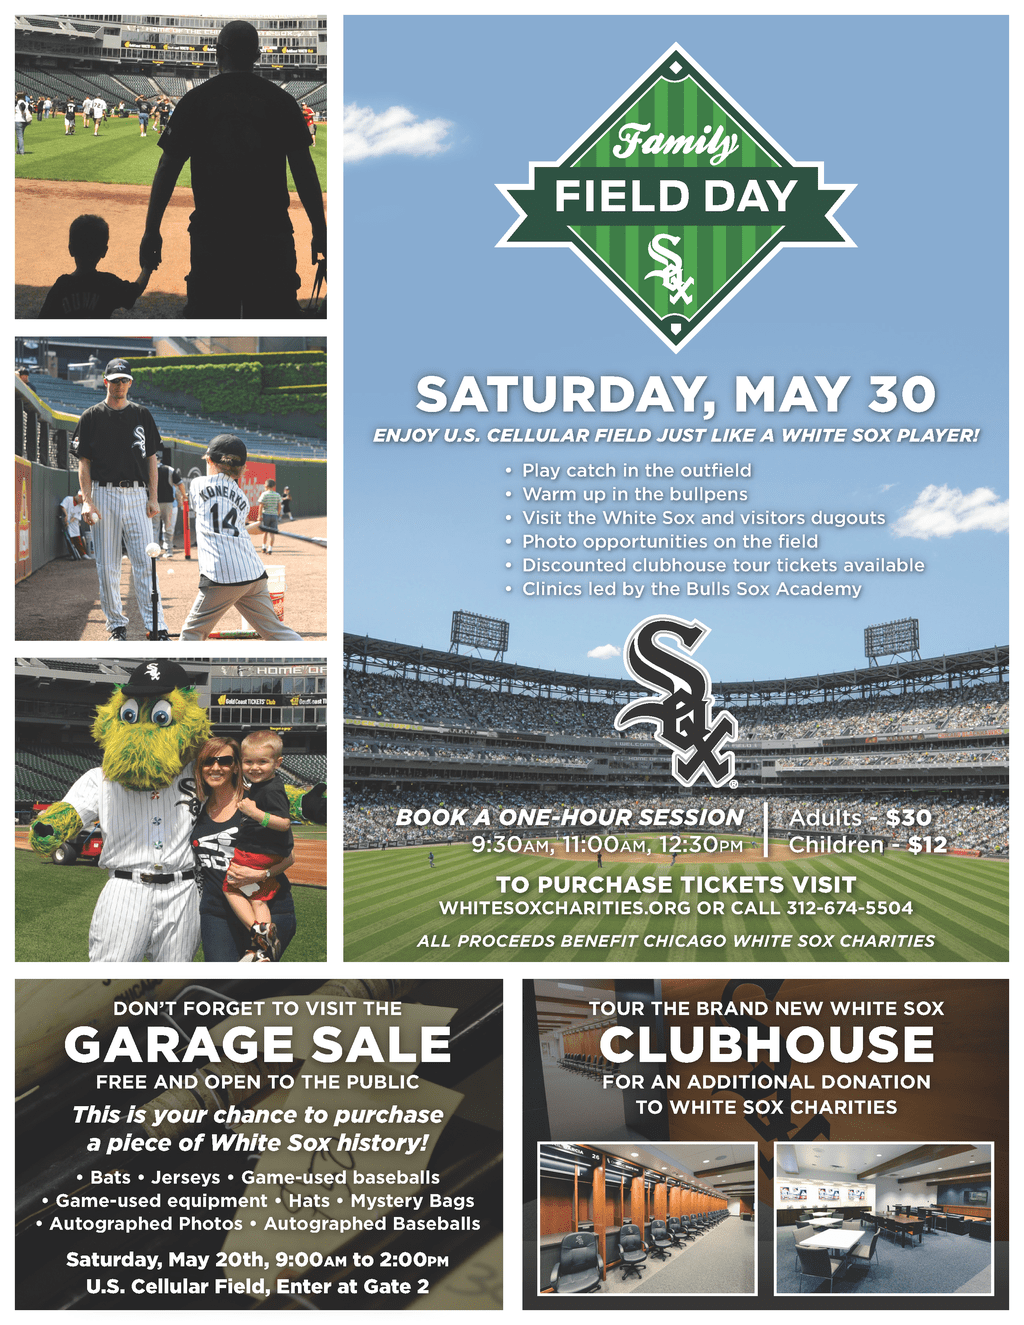 White Sox Family Field Day! plus #giveaway (ends 5/26 at 11:59 EST) @ whitesox